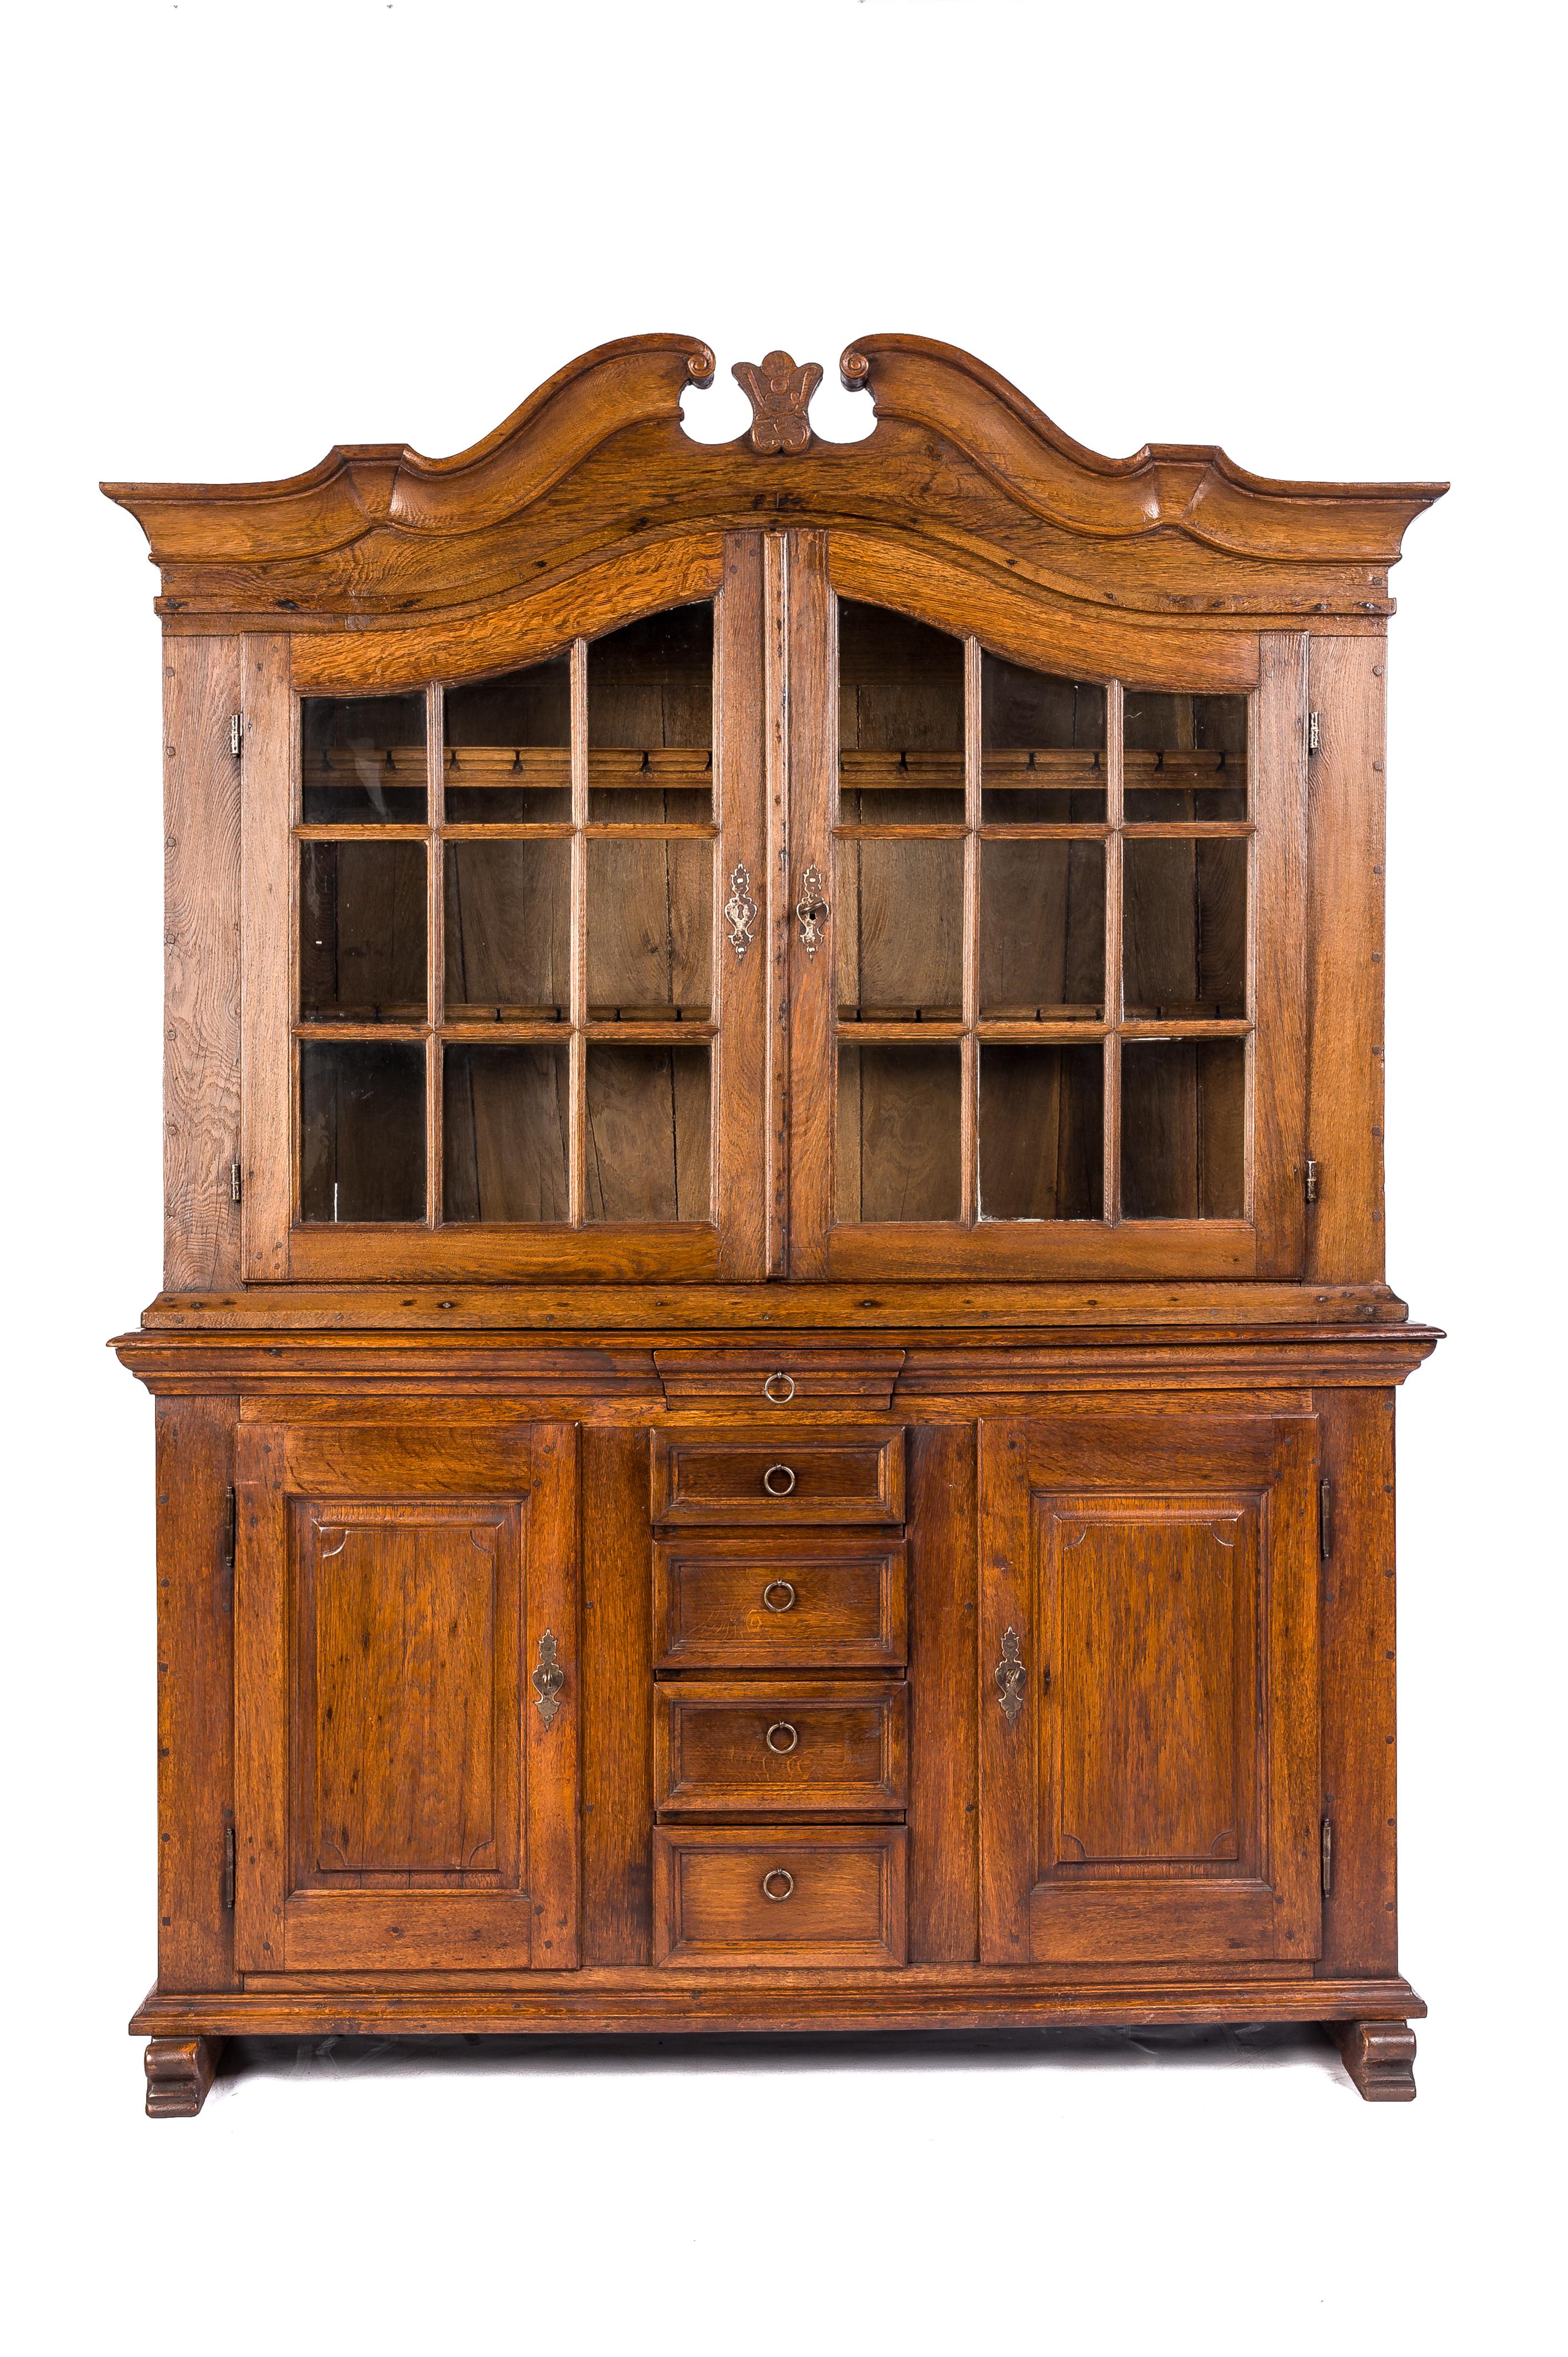 Polished Antique 18th Century German Baroque Warm Brown Solid Oak Display Cabinet For Sale